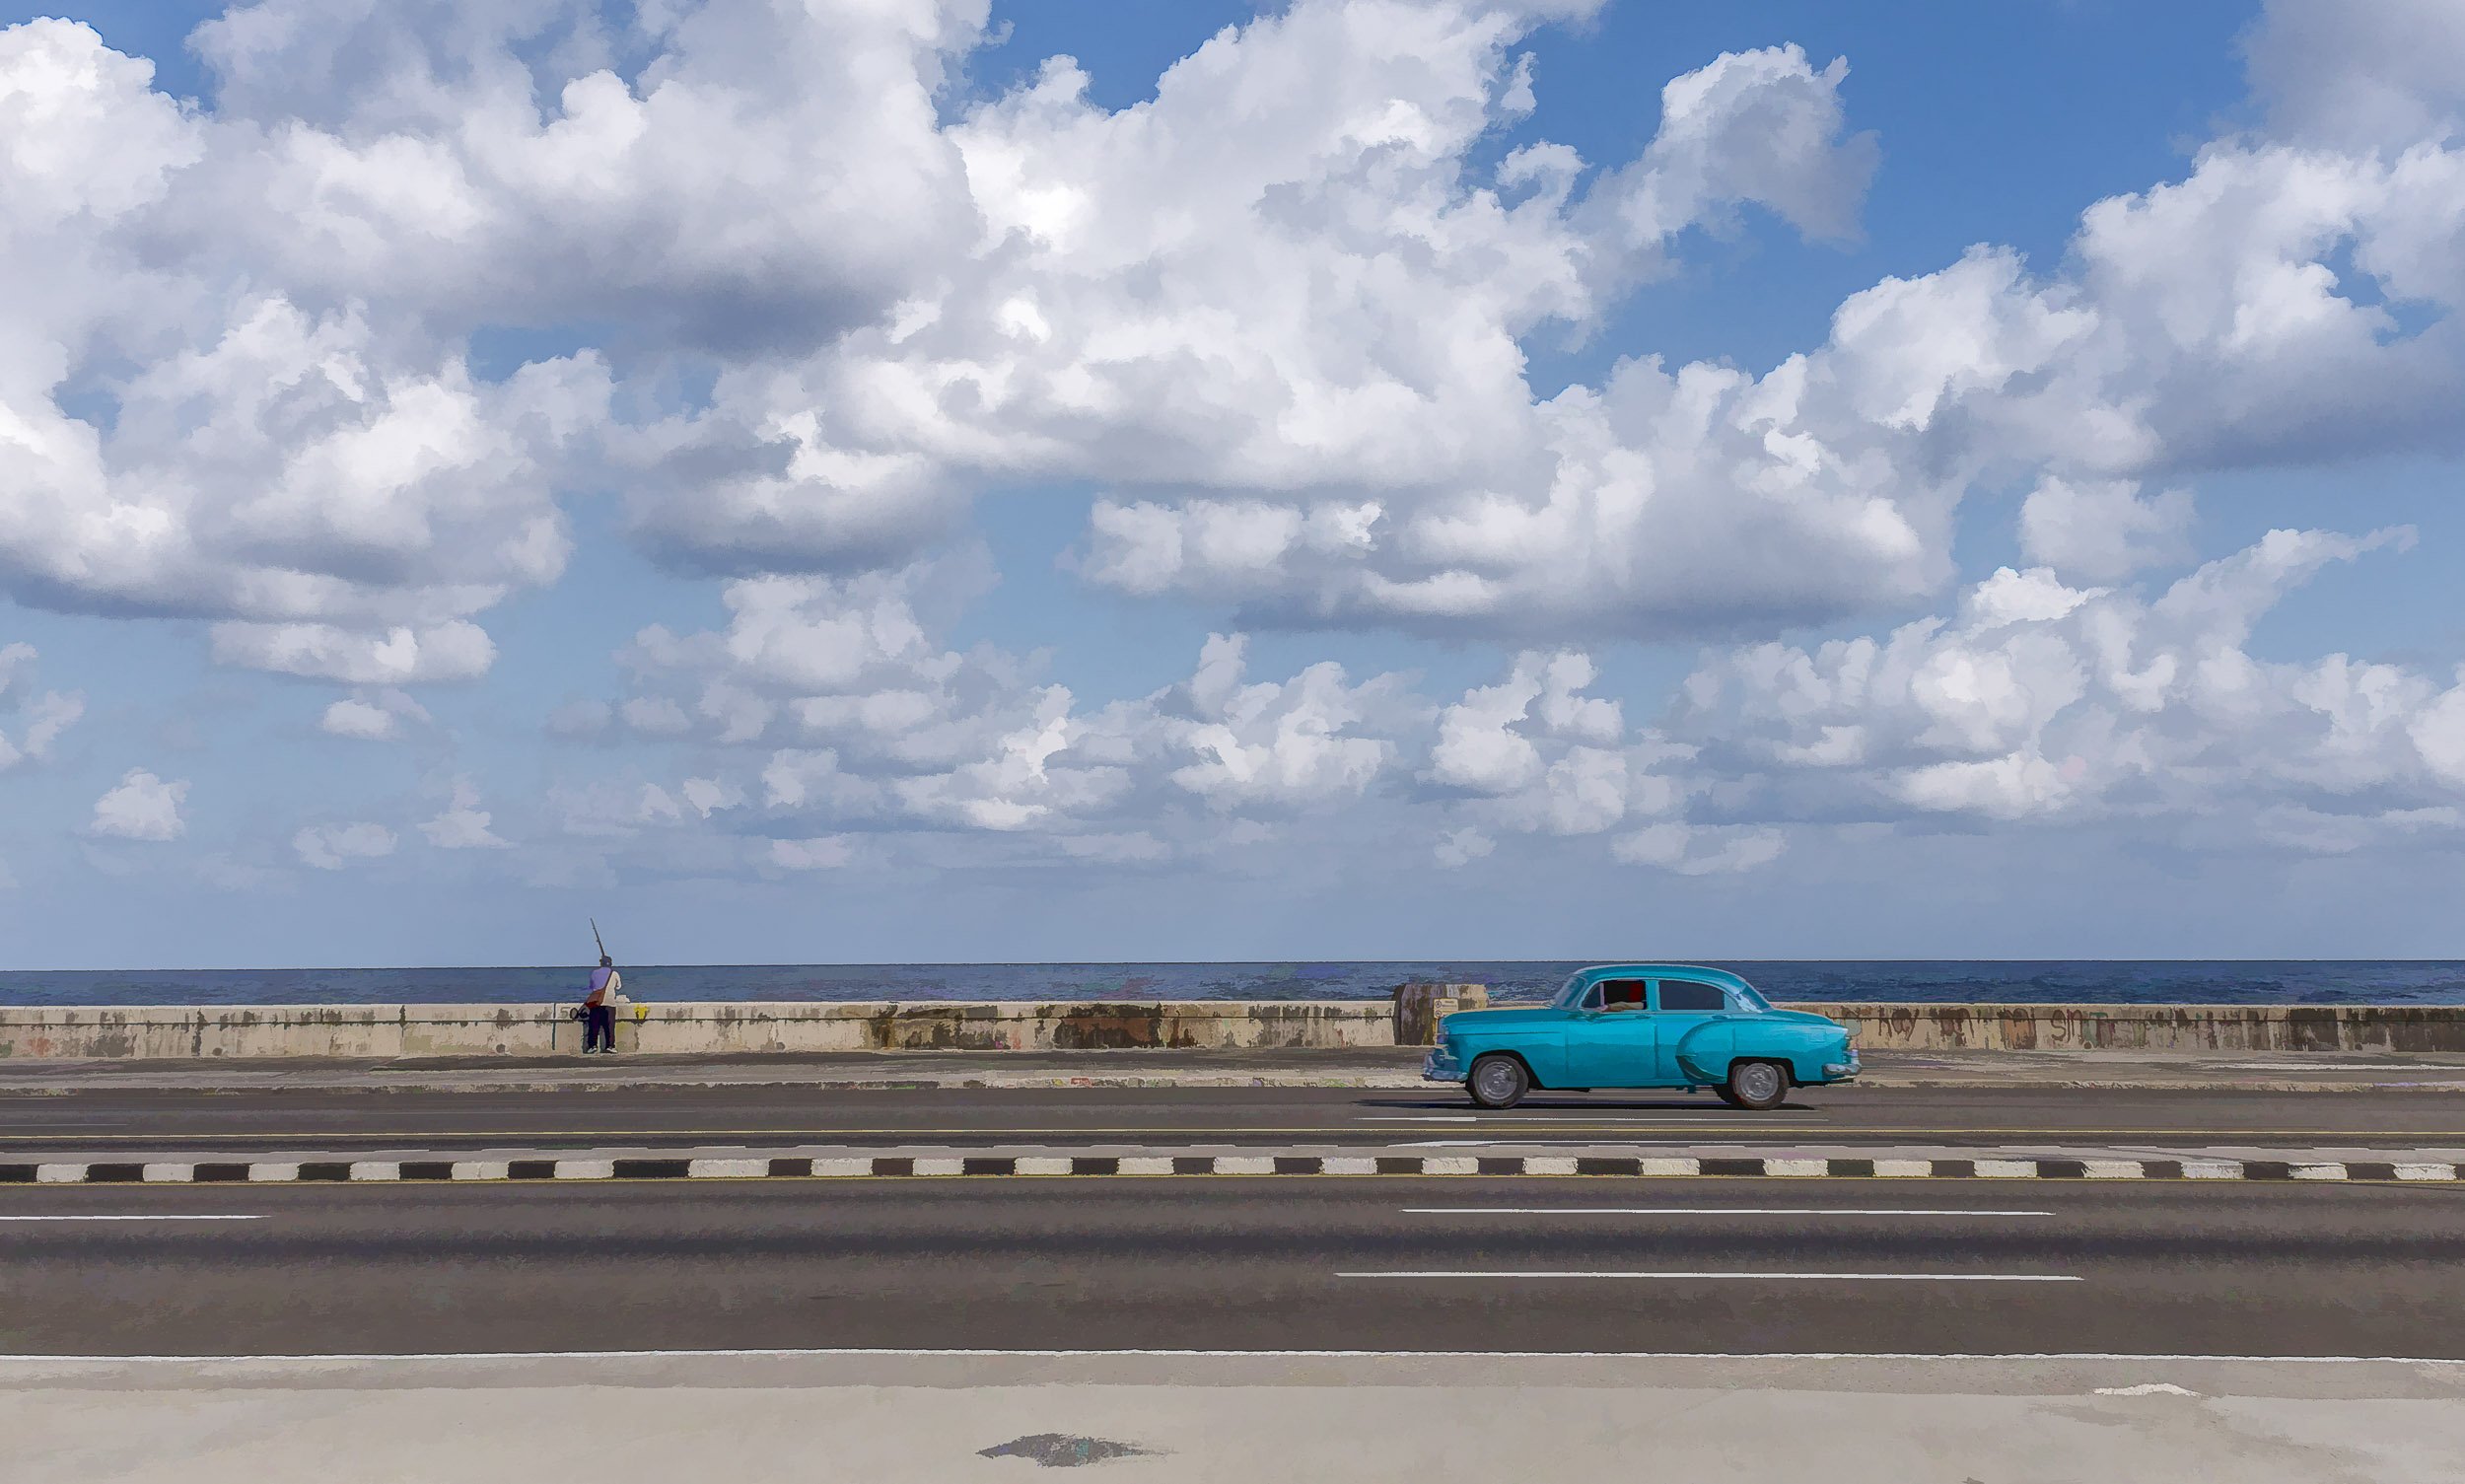 Old Blue Car and Fisherman, Malecon, Havana